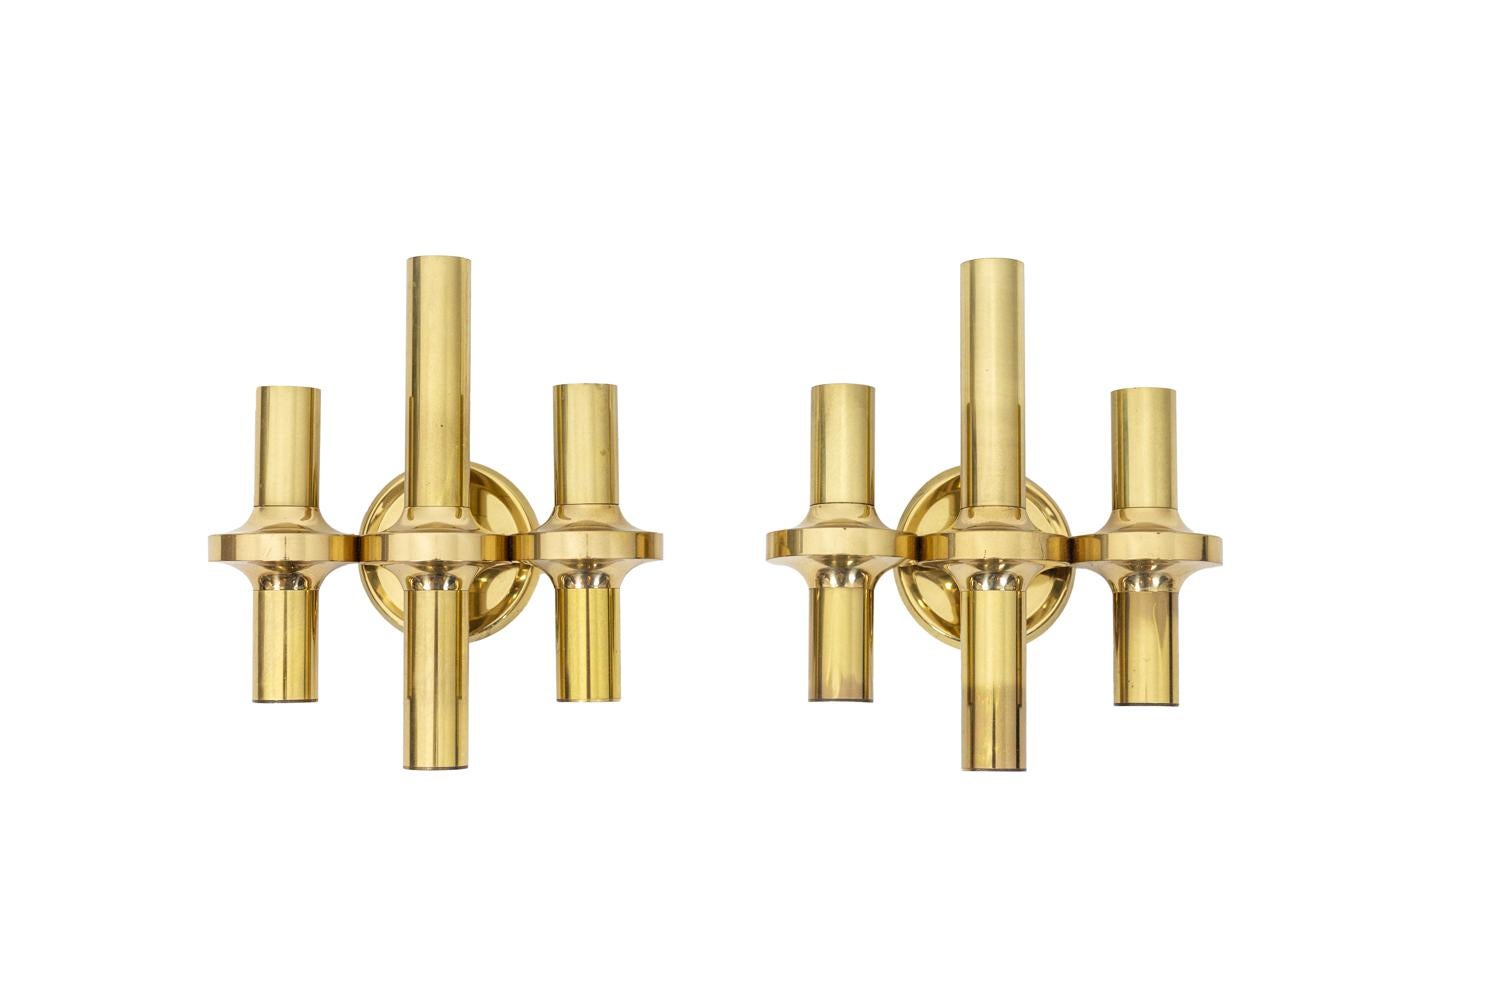 Gaetano Sciolari for Boulanger, attributed to.

Pair of wall sconces in gilt brass with three-light formed by three different sized tubes centred by rings that link them.

Work realized in the 1970s.